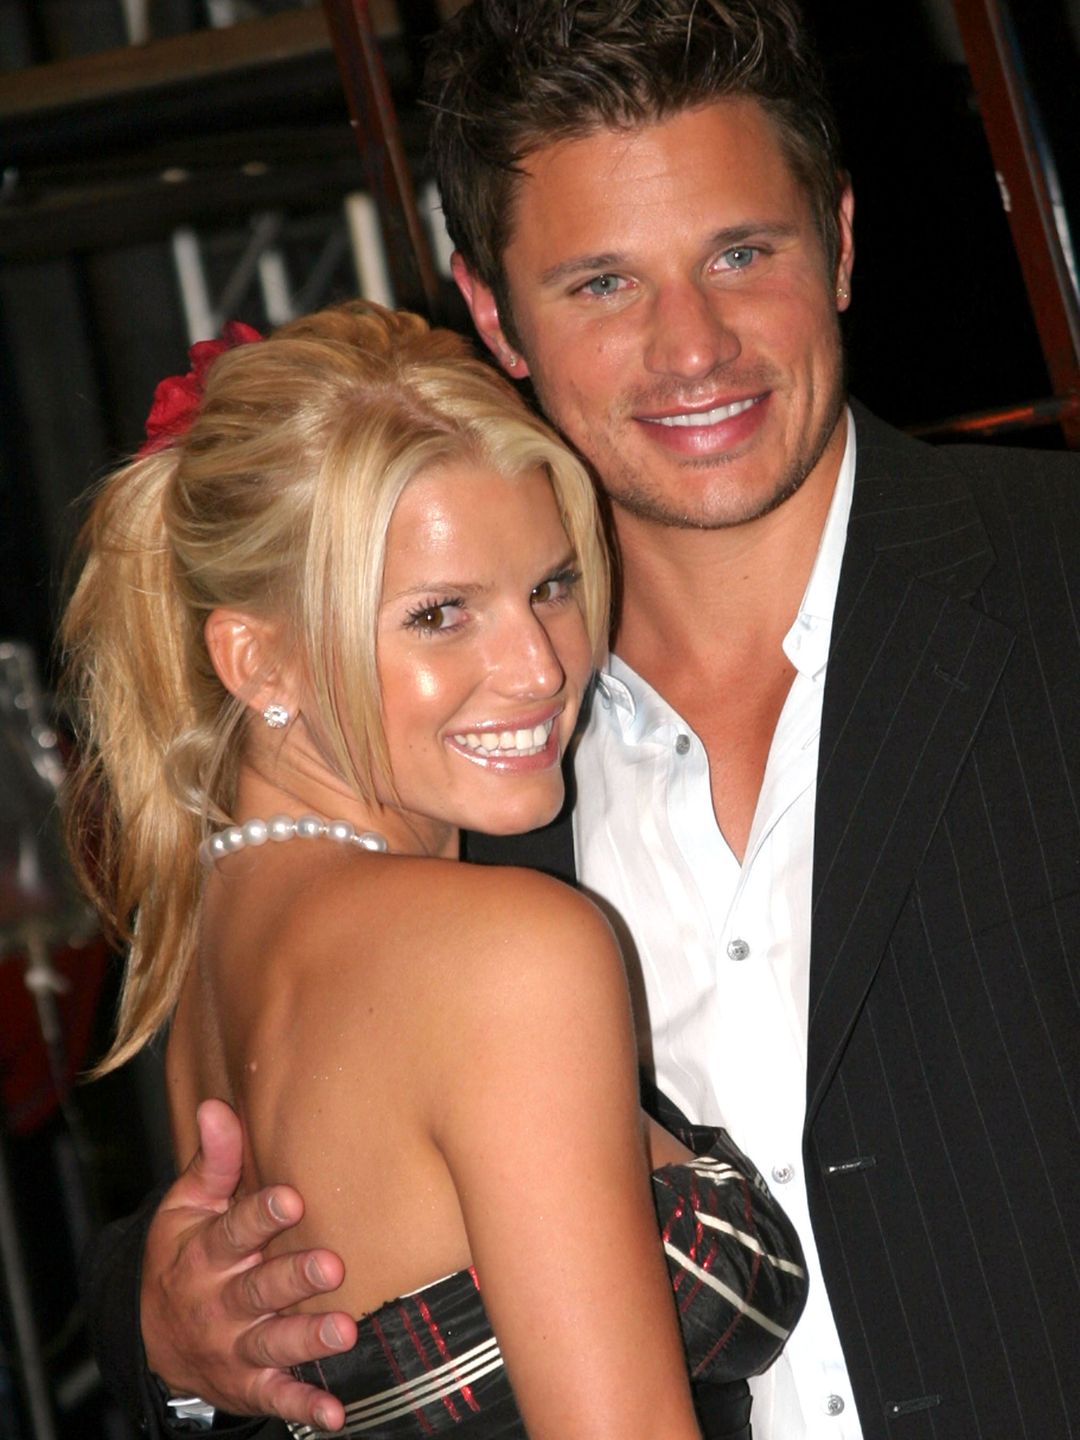 Jessica Simpson and Nick Lachey smiling together at an event